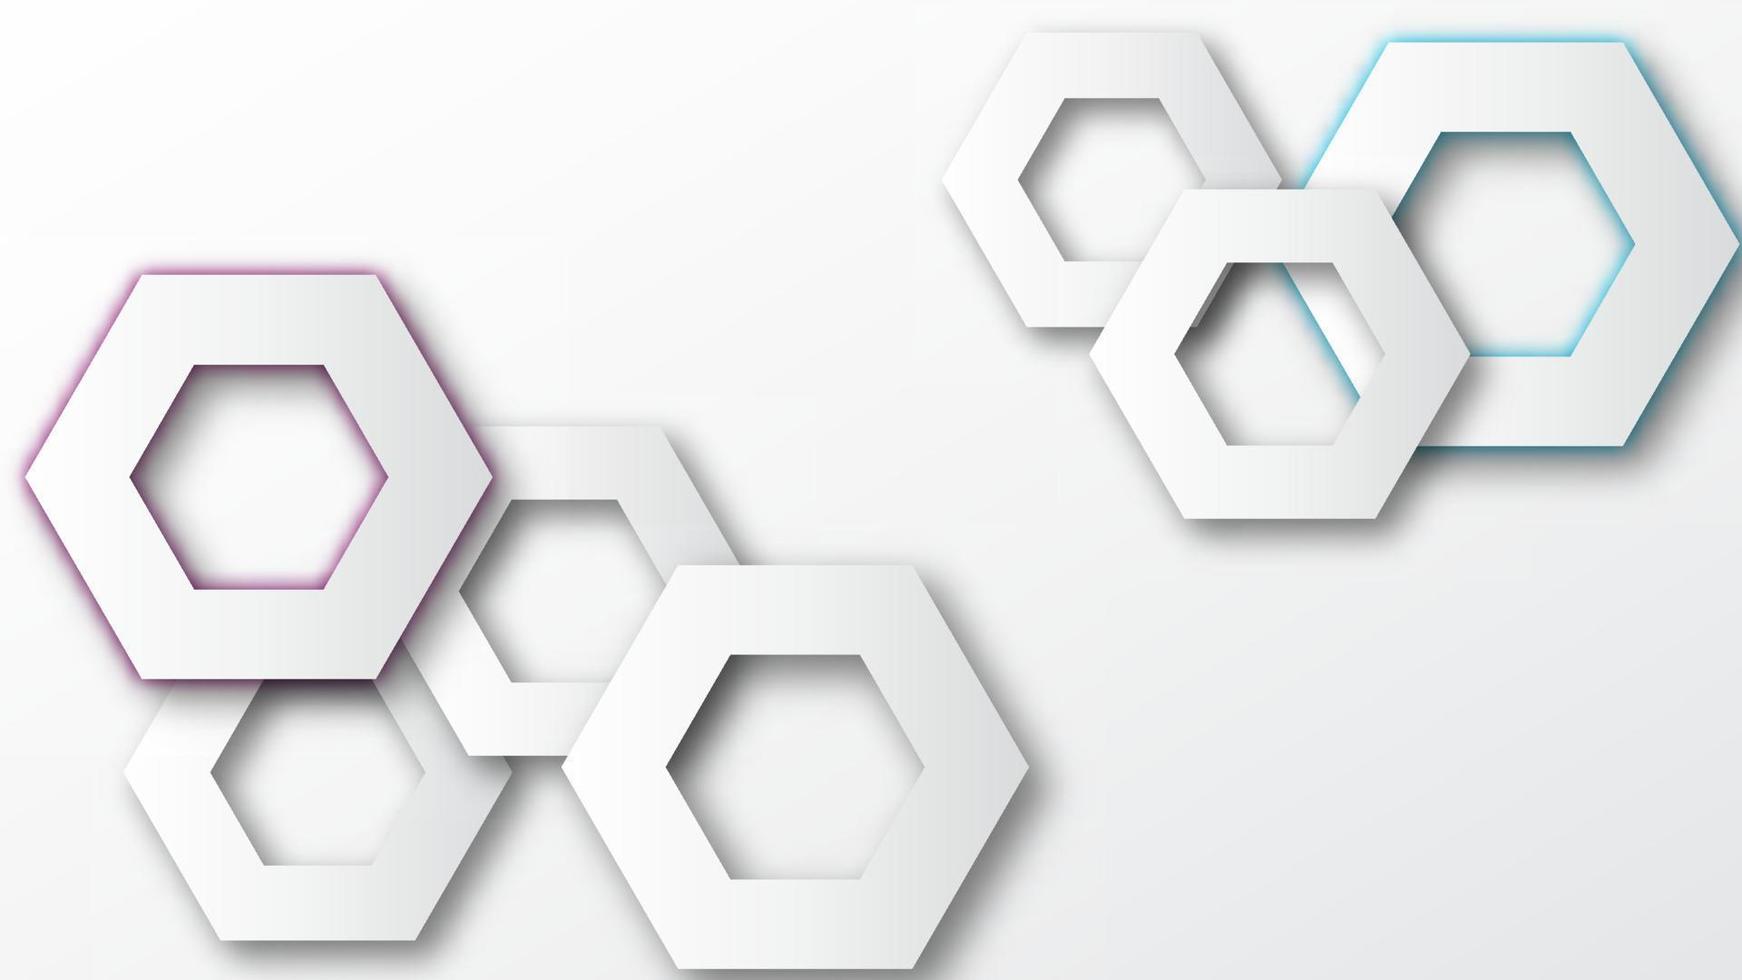 Hexagon technology background with shadows. Gray cut paper geometric shapes. vector